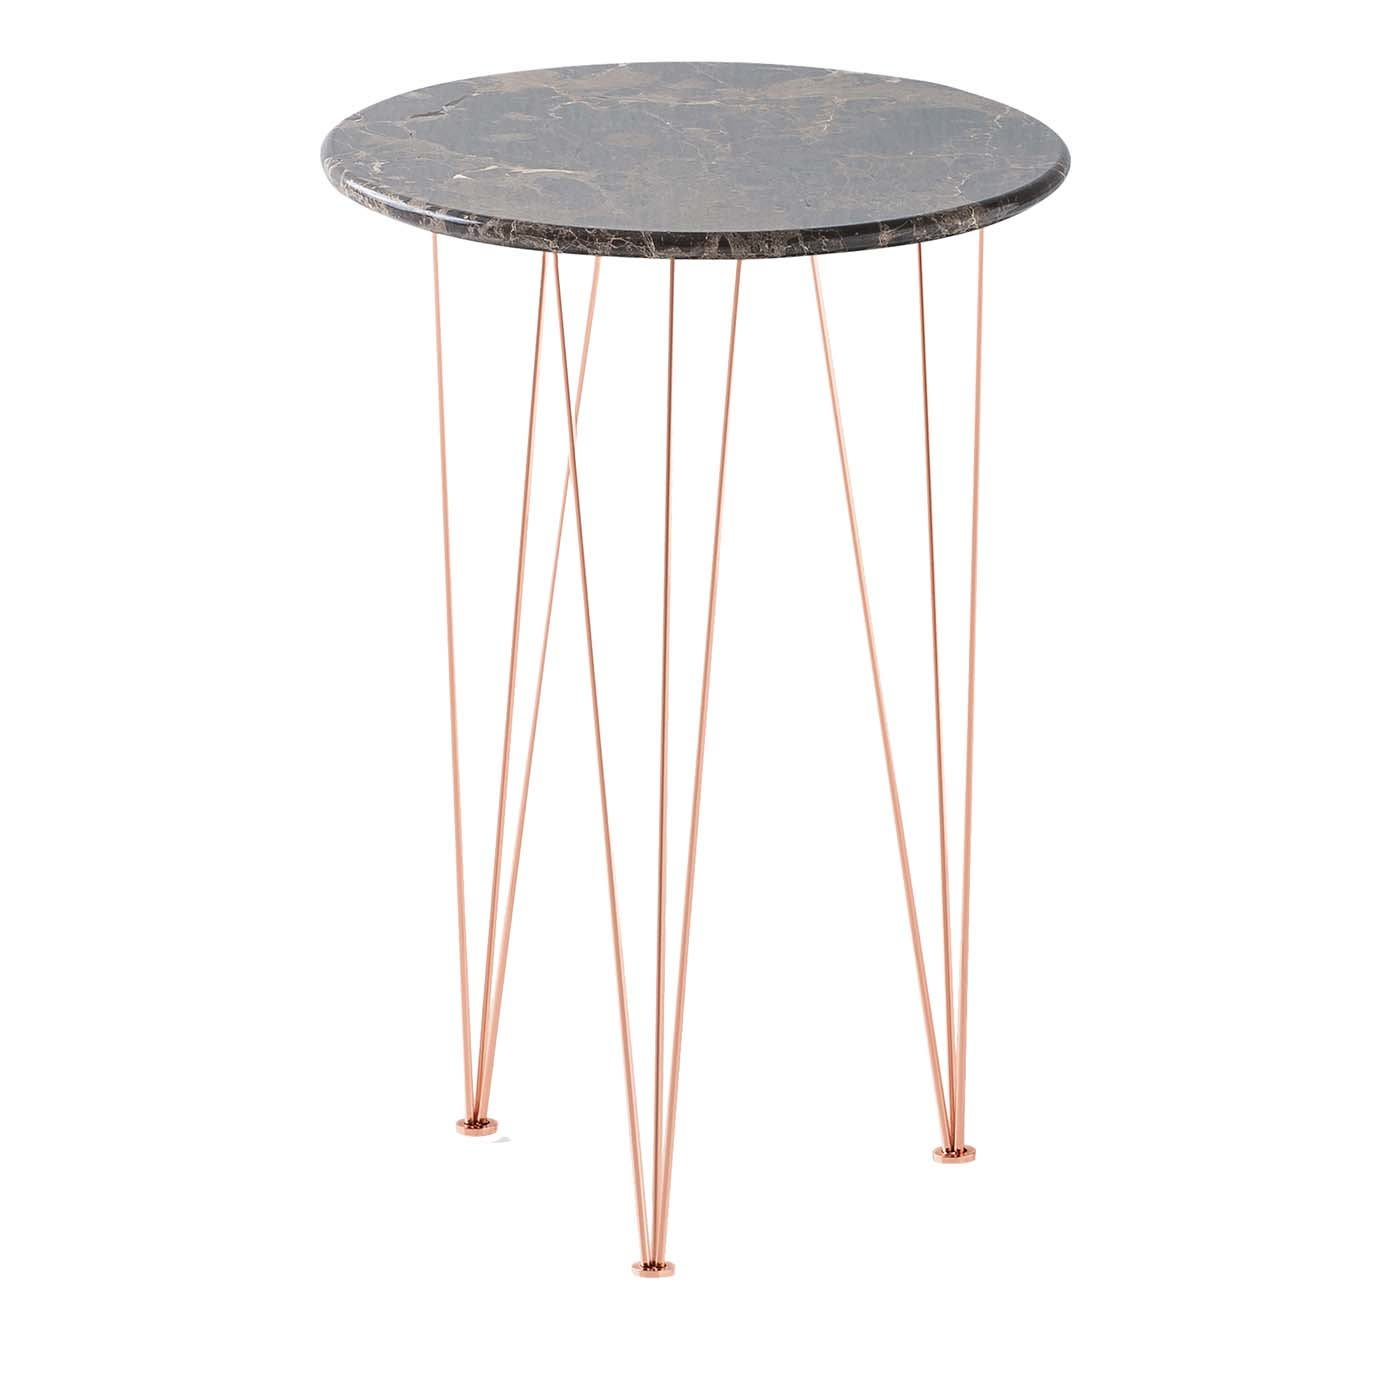 Flamingo Tall Round Side Table with Copper Legs - Gam Home